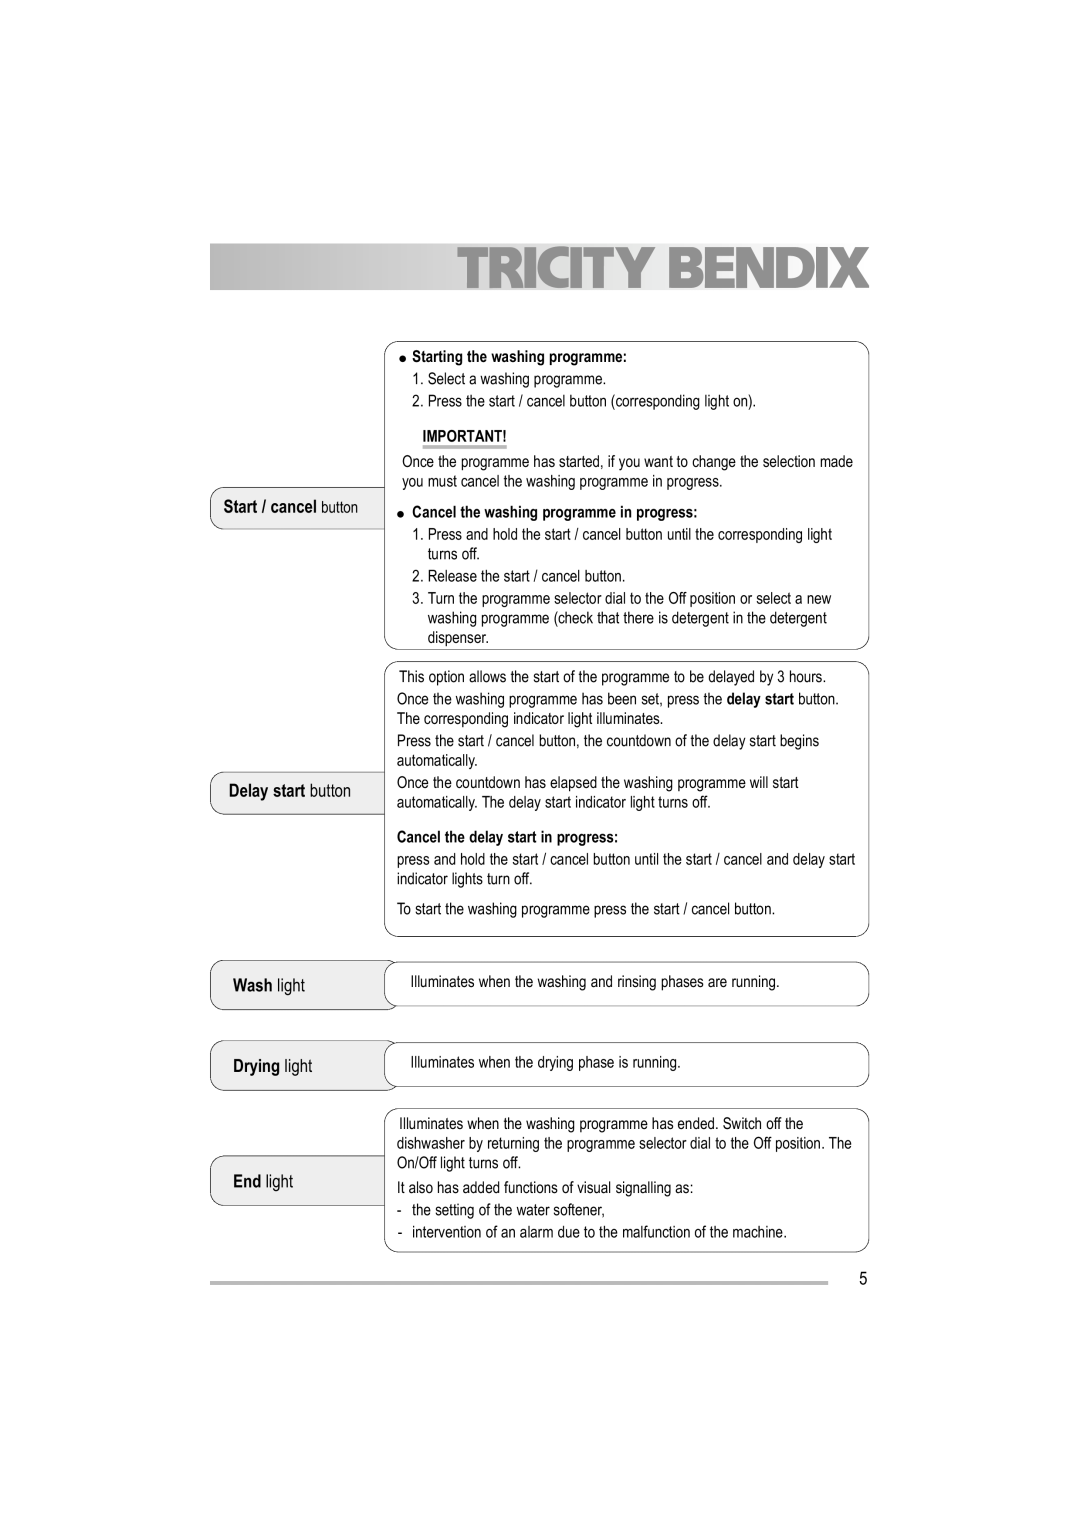 Tricity Bendix TDF 221 Start / cancel button Delay start button, Wash light Drying light, Starting the washing programme 